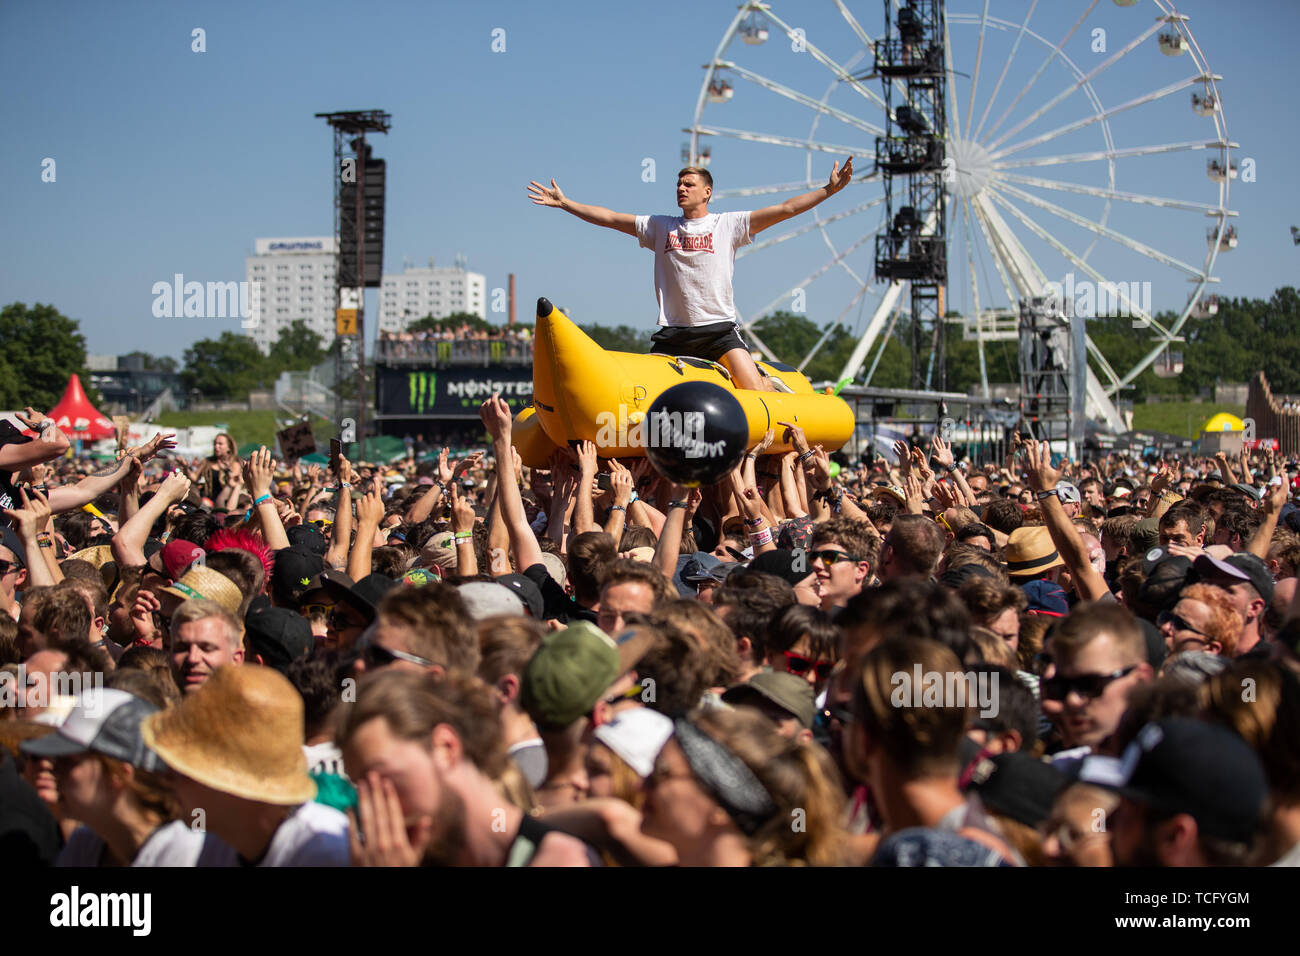 Nuremberg, Germany. 07th June, 2019. A visitor of the open-air festival 'Rock im Park' is carried over the crowd by other visitors during a concert on an inflatable banana. The music festival runs until 9 June 2019. Credit: Daniel Karmann/dpa/Alamy Live News Stock Photo